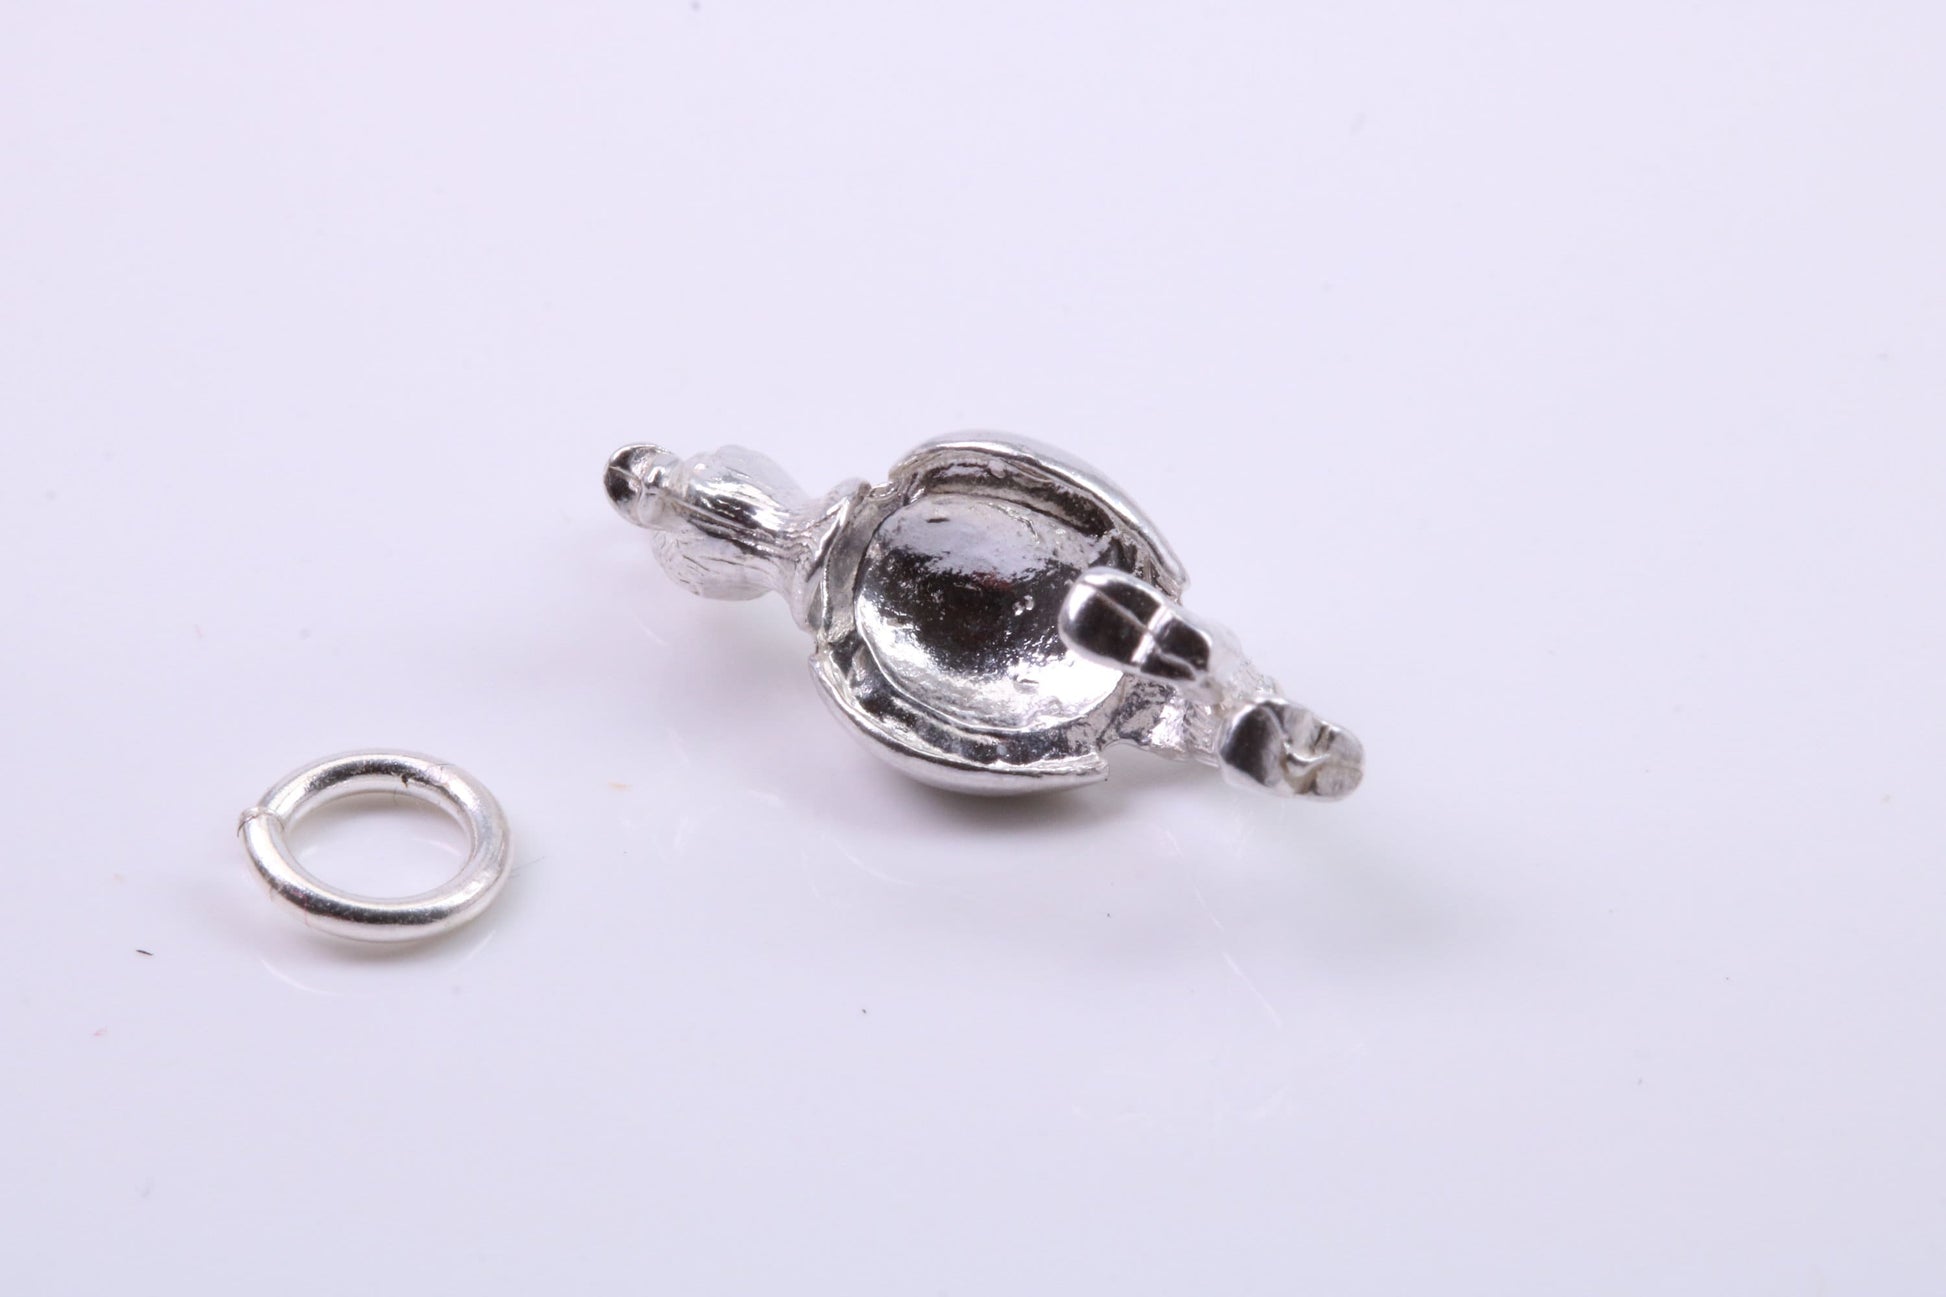 Walking Duck Charm, Traditional Charm, Made from Solid 925 Grade Sterling Silver, Complete with Attachment Link